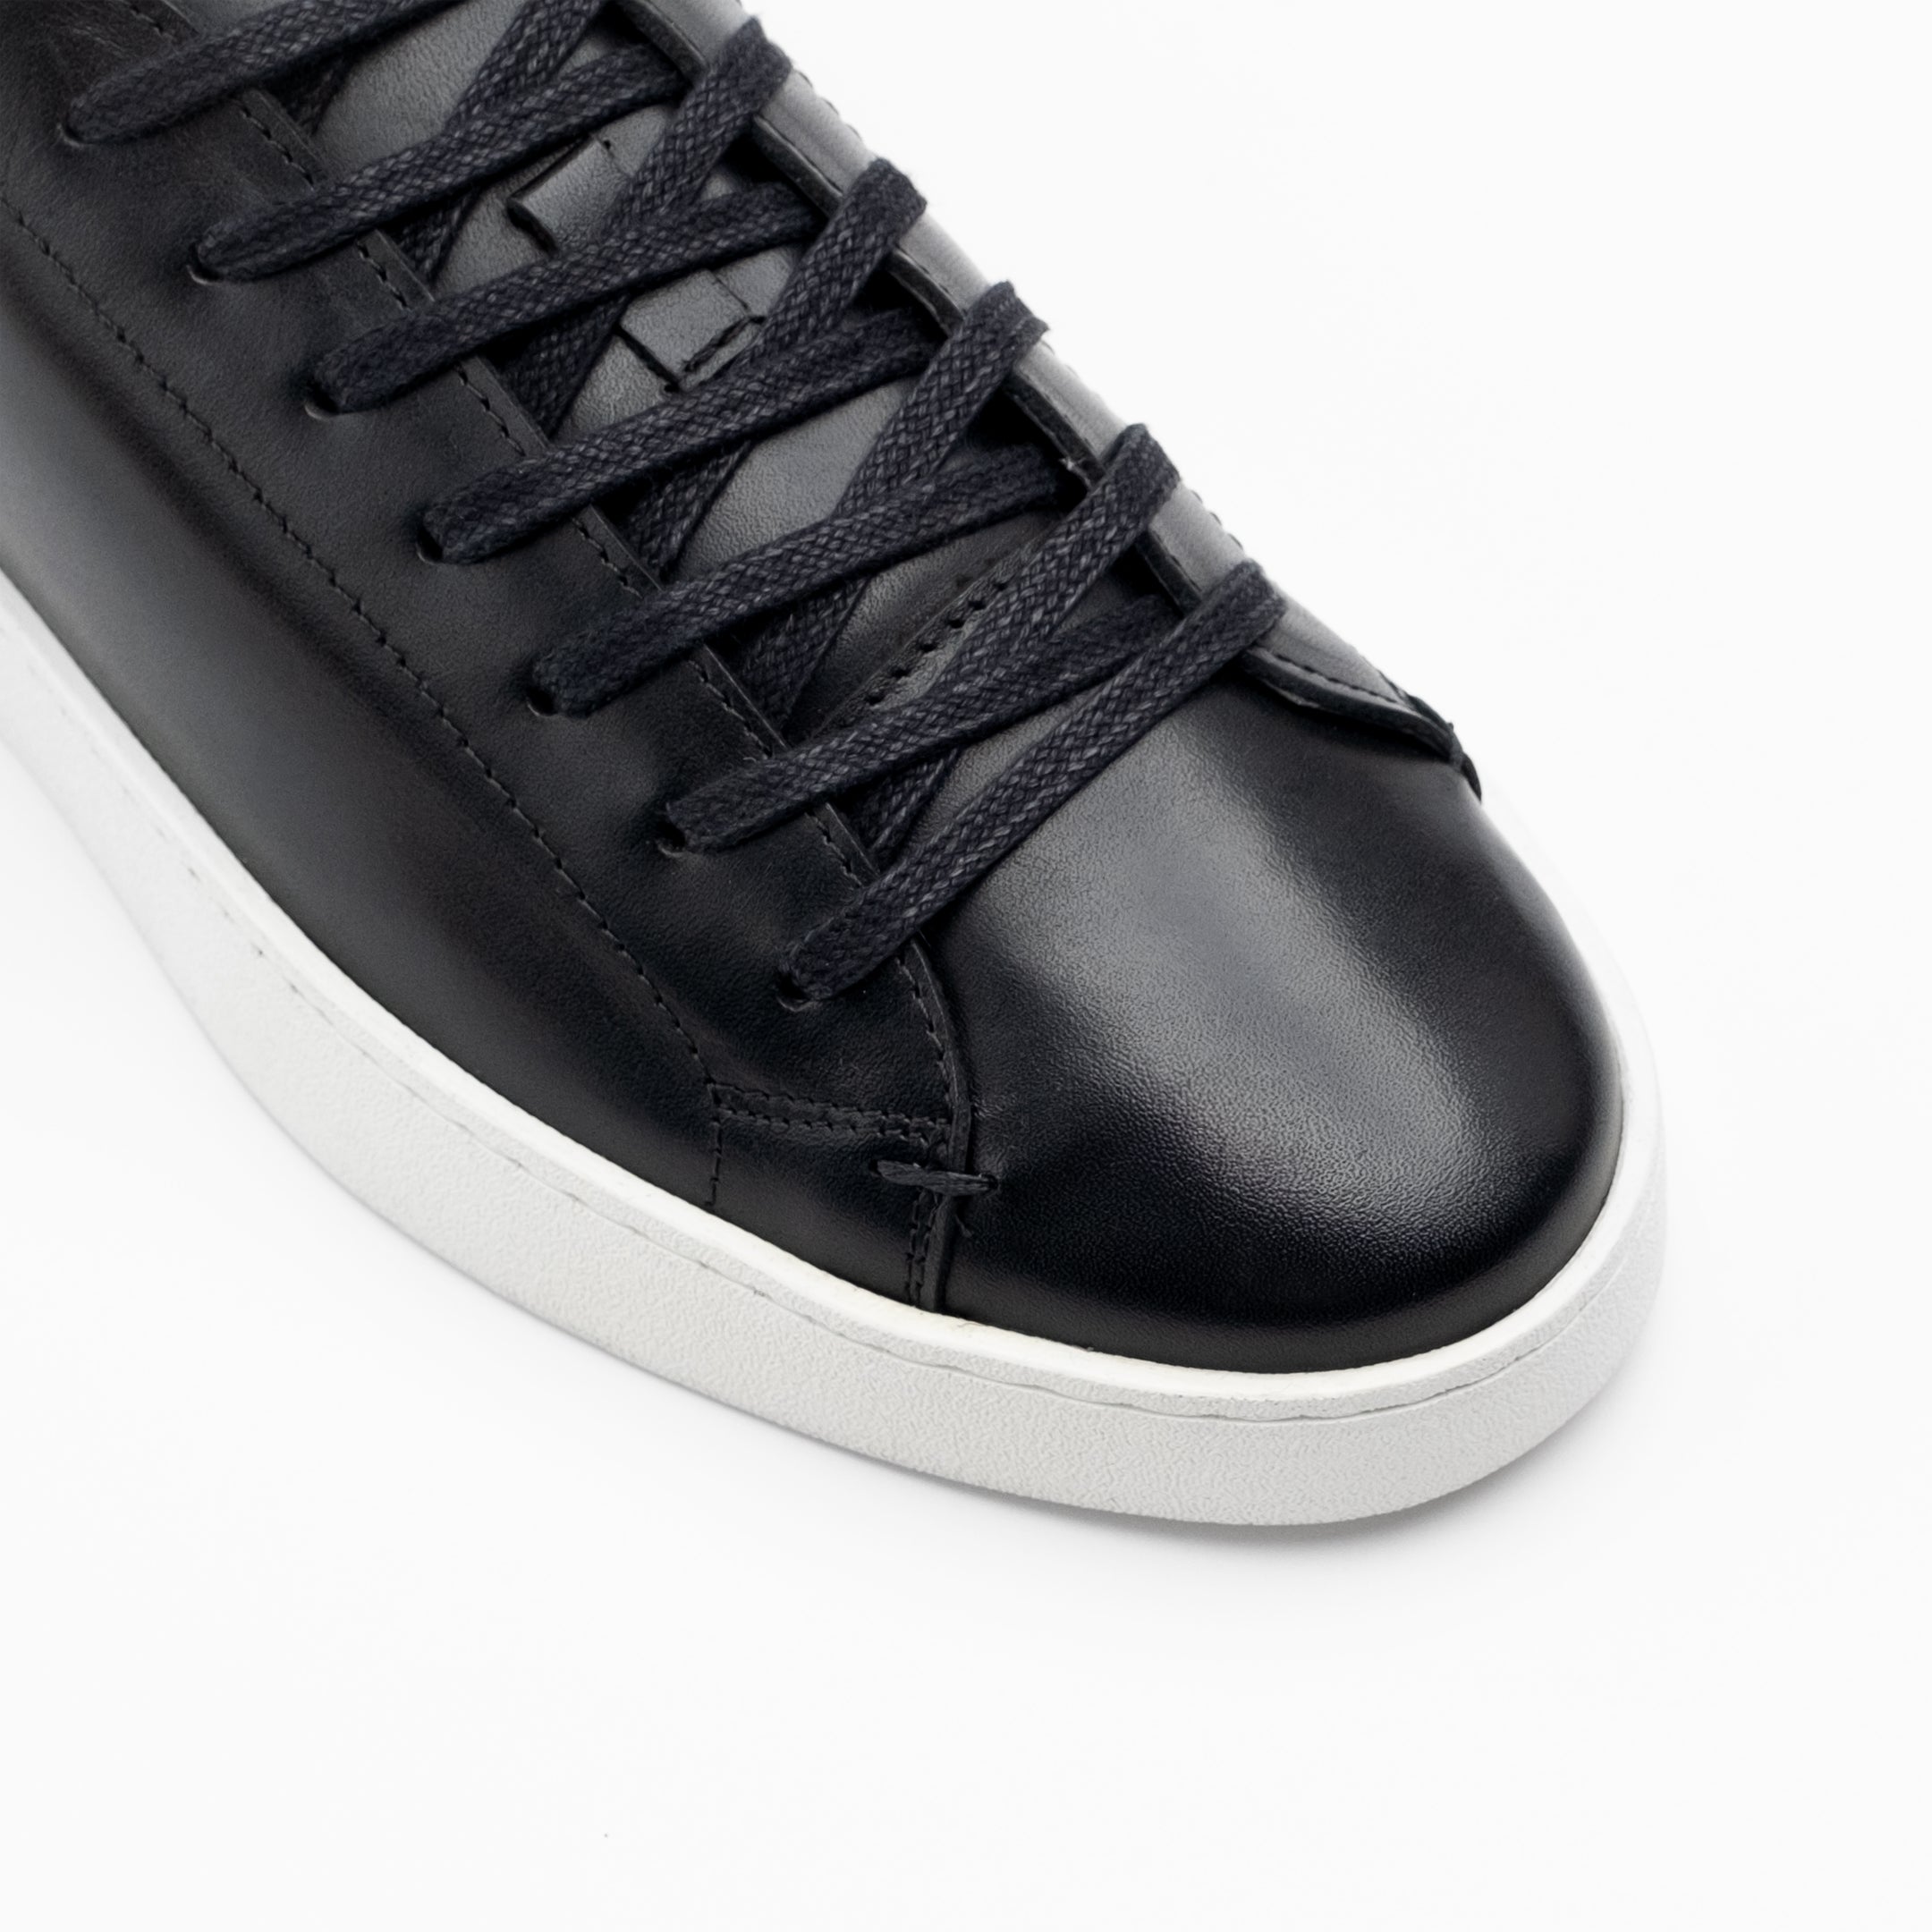 Walk London Mens Marco Trainer in Black Leather